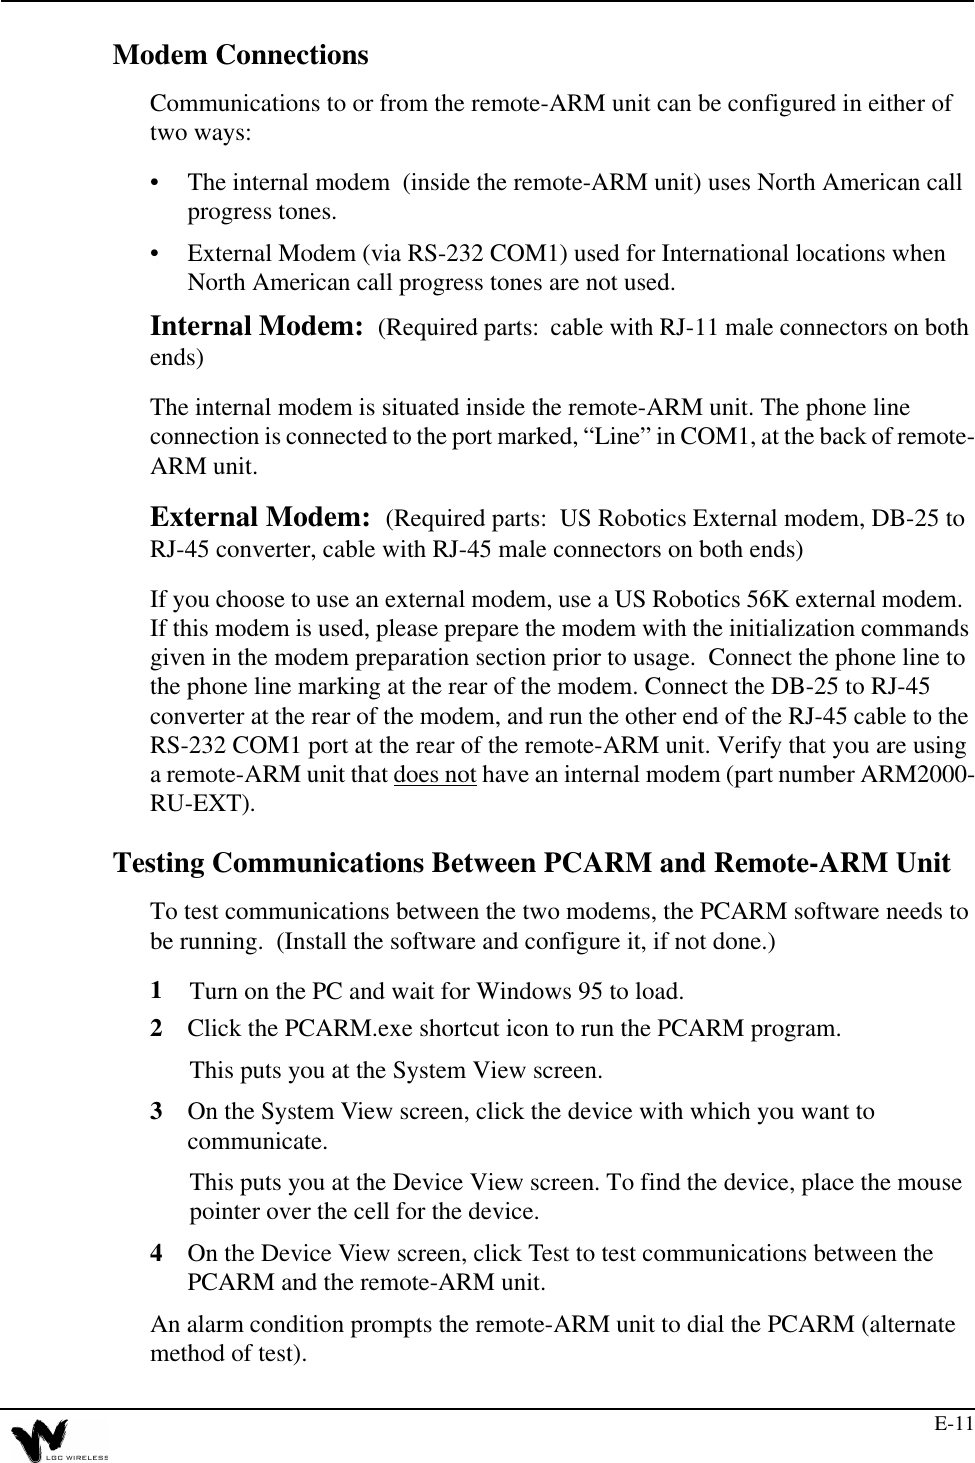 E-11Modem ConnectionsCommunications to or from the remote-ARM unit can be configured in either of two ways:•The internal modem  (inside the remote-ARM unit) uses North American call progress tones.•External Modem (via RS-232 COM1) used for International locations when North American call progress tones are not used.Internal Modem:  (Required parts:  cable with RJ-11 male connectors on both ends)The internal modem is situated inside the remote-ARM unit. The phone line connection is connected to the port marked, “Line” in COM1, at the back of remote-ARM unit. External Modem:  (Required parts:  US Robotics External modem, DB-25 to RJ-45 converter, cable with RJ-45 male connectors on both ends)If you choose to use an external modem, use a US Robotics 56K external modem.  If this modem is used, please prepare the modem with the initialization commands given in the modem preparation section prior to usage.  Connect the phone line to the phone line marking at the rear of the modem. Connect the DB-25 to RJ-45 converter at the rear of the modem, and run the other end of the RJ-45 cable to the RS-232 COM1 port at the rear of the remote-ARM unit. Verify that you are using a remote-ARM unit that does not have an internal modem (part number ARM2000-RU-EXT).Testing Communications Between PCARM and Remote-ARM UnitTo test communications between the two modems, the PCARM software needs to be running.  (Install the software and configure it, if not done.)1Turn on the PC and wait for Windows 95 to load.2Click the PCARM.exe shortcut icon to run the PCARM program.This puts you at the System View screen.3On the System View screen, click the device with which you want to communicate.This puts you at the Device View screen. To find the device, place the mouse pointer over the cell for the device.4On the Device View screen, click Test to test communications between the PCARM and the remote-ARM unit.An alarm condition prompts the remote-ARM unit to dial the PCARM (alternate method of test).